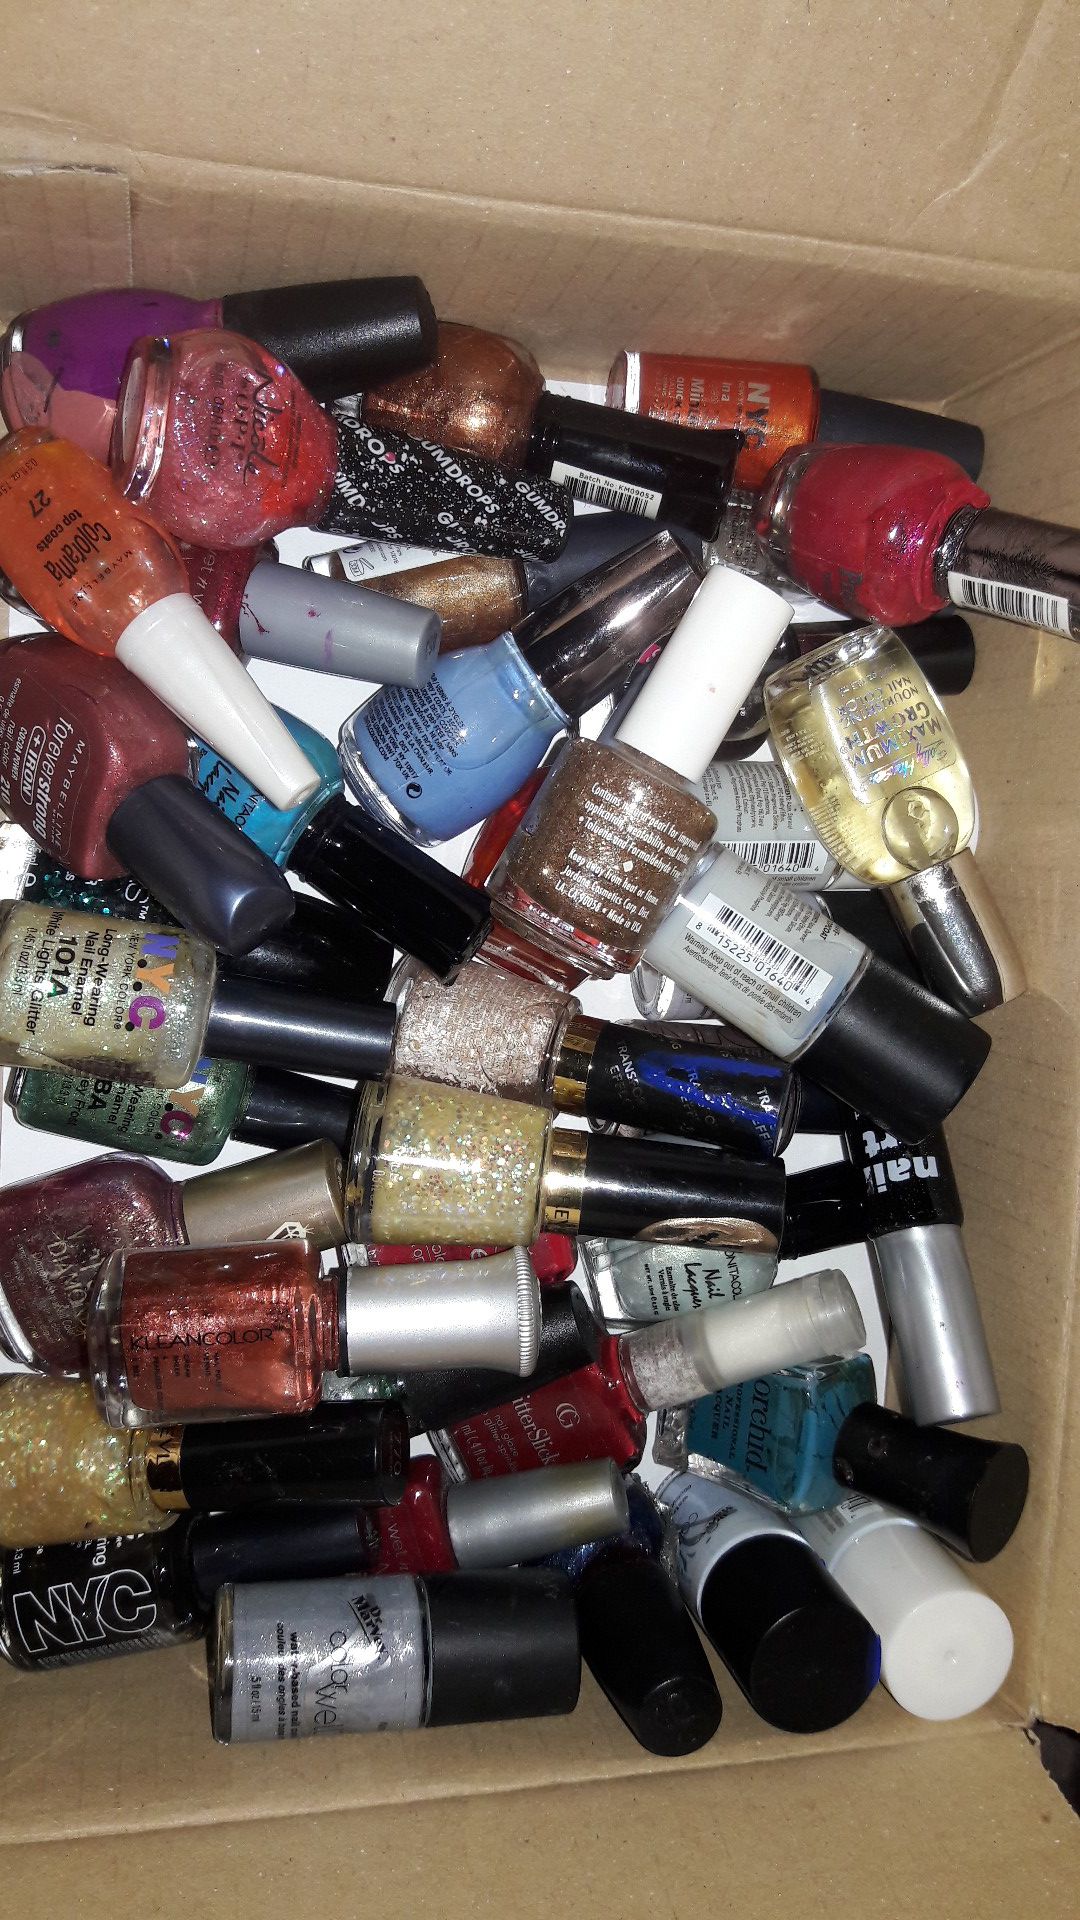 Semi New and used nail polishes all for $10